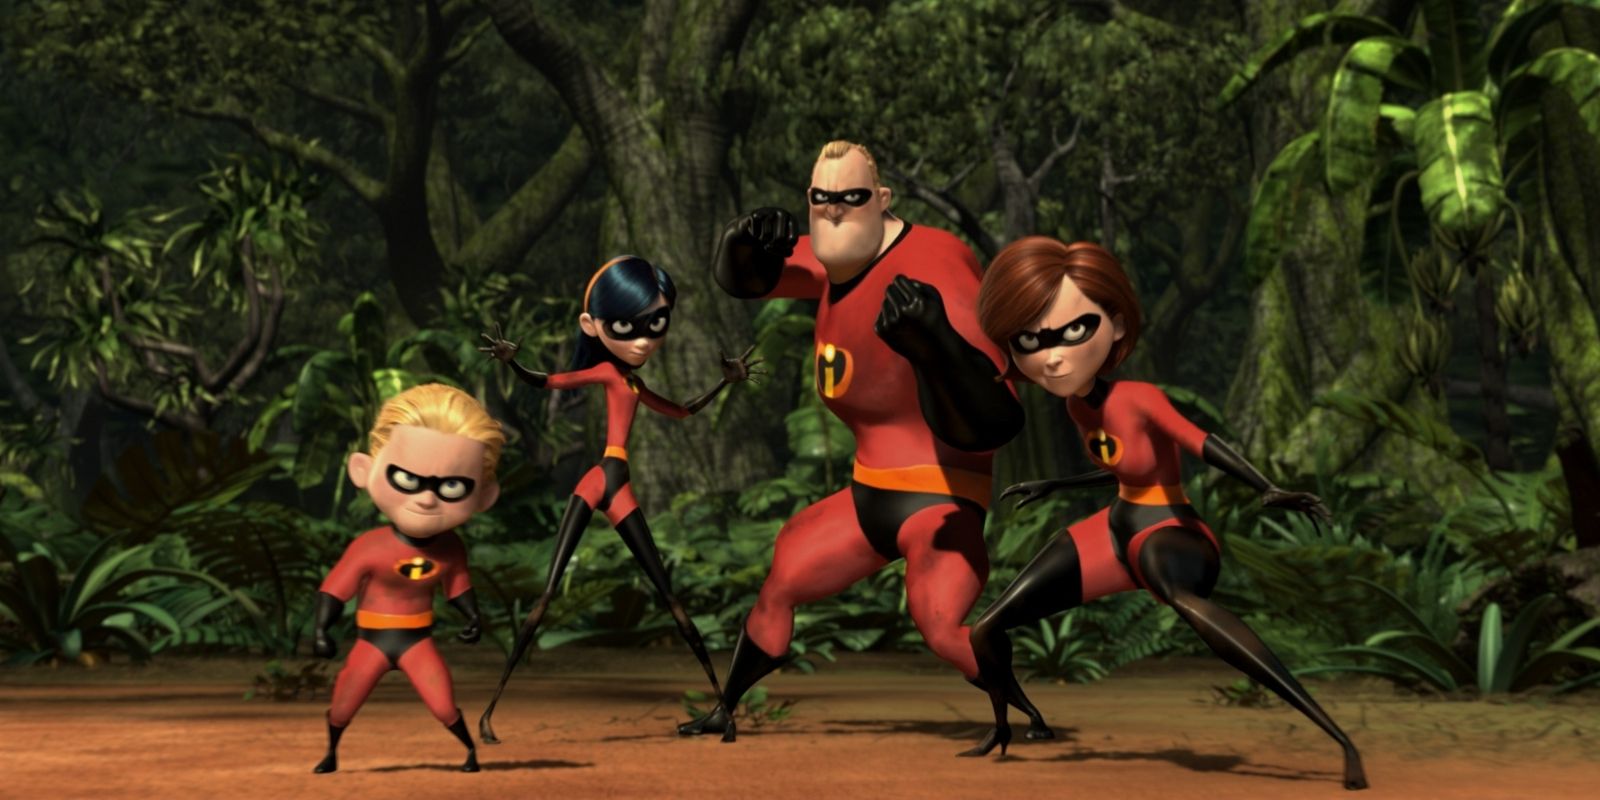 The Incredibles readying for battle in the jungle in The Incredibles